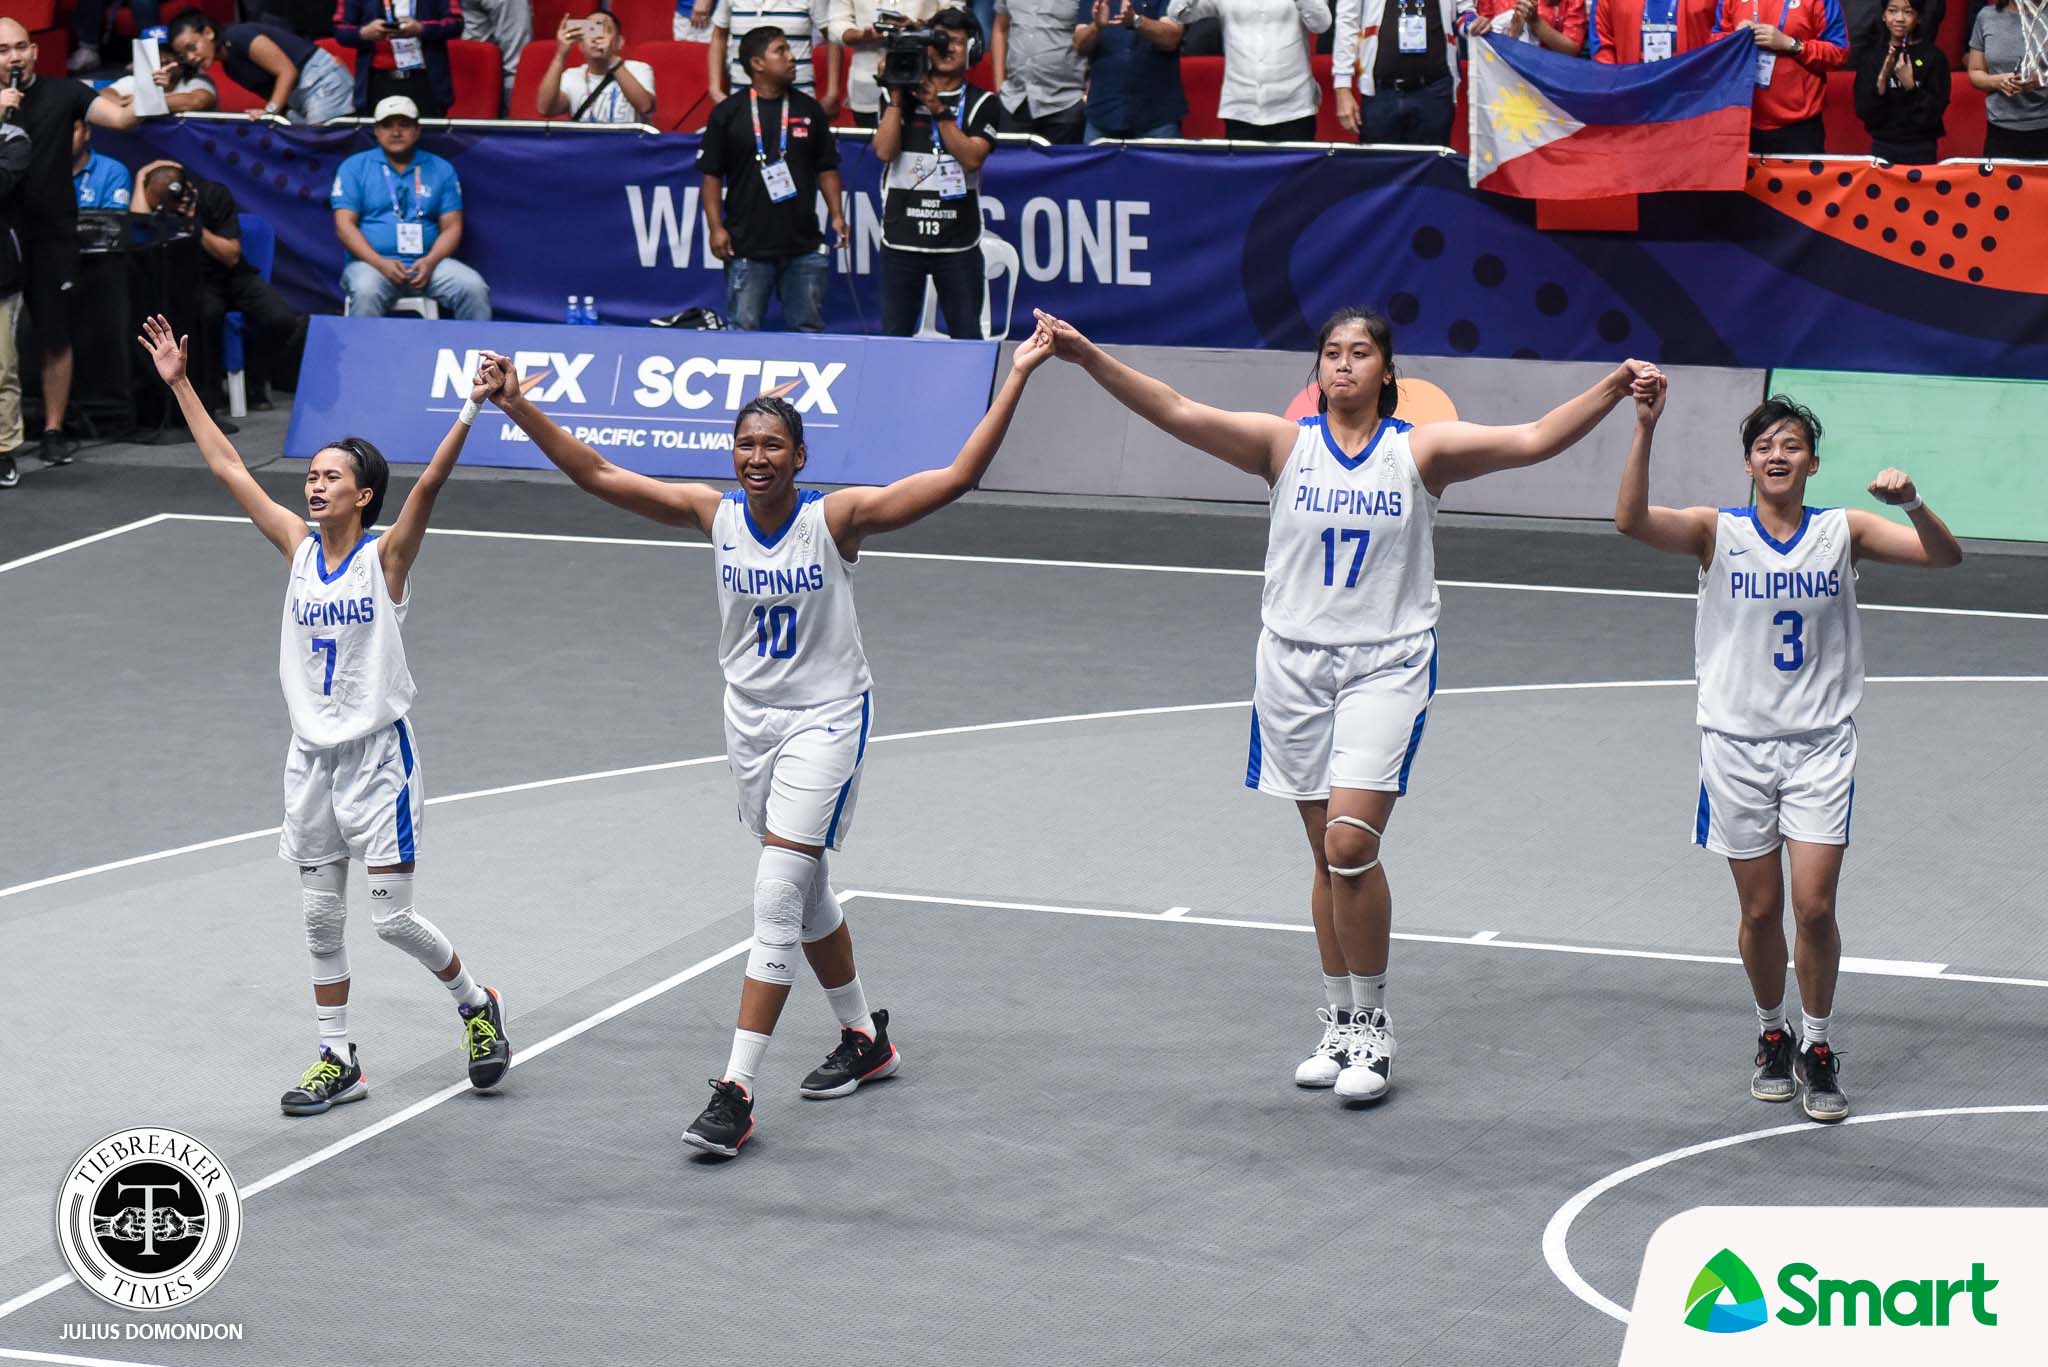 seag-3x3-gilas-pilipinas-3x3-womens Clare Castro fulfills promise to Gilas Women's 2019 SEA Games 3x3 Basketball Basketball Gilas Pilipinas News  - philippine sports news